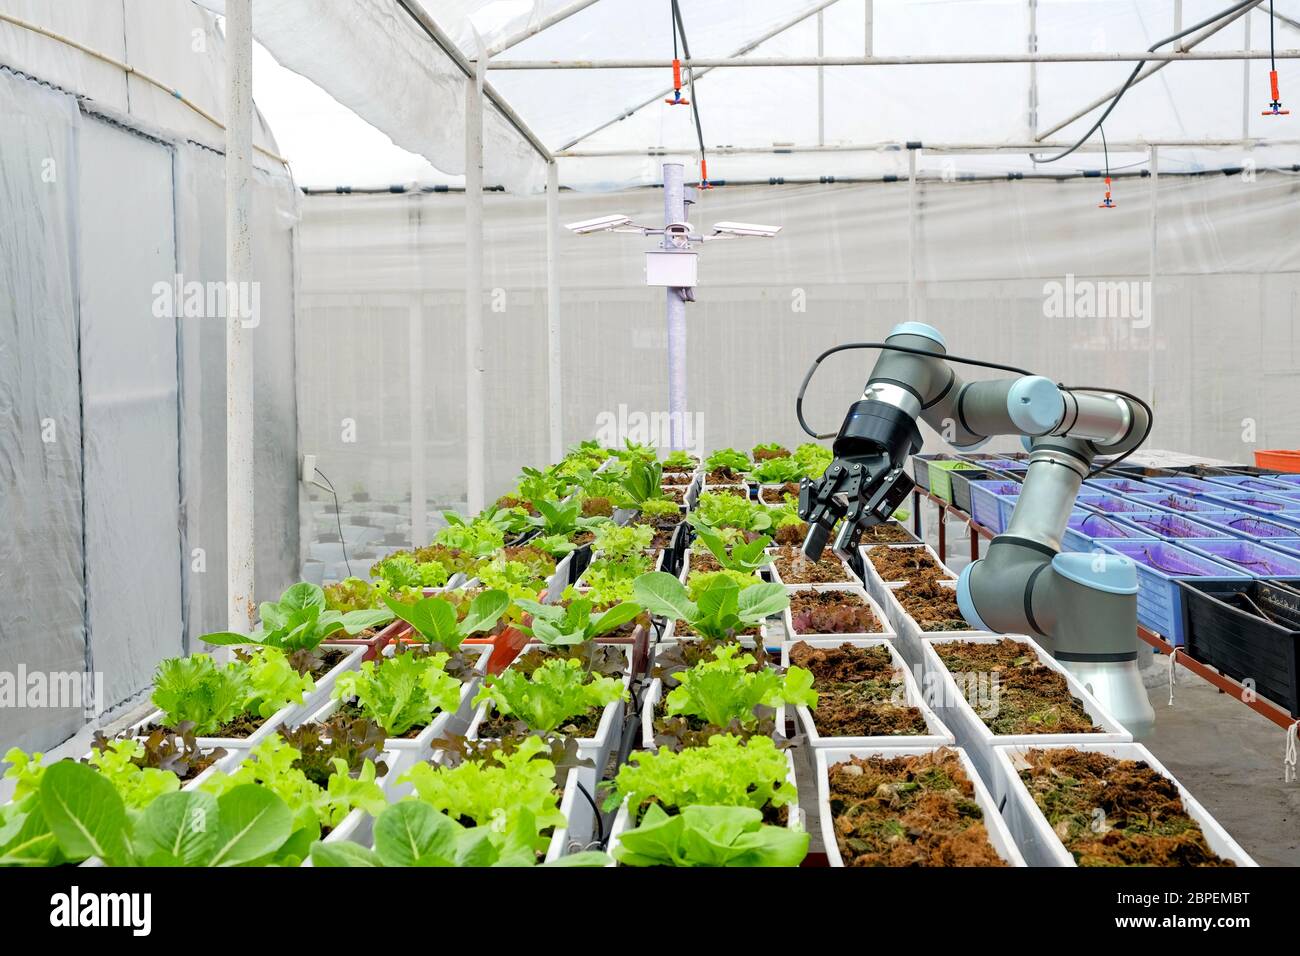 Modern organic farmhouse adopts the technology of robotic industry to apply for used in vegetable plots to work and installed CCTV cameras for monitor Stock Photo